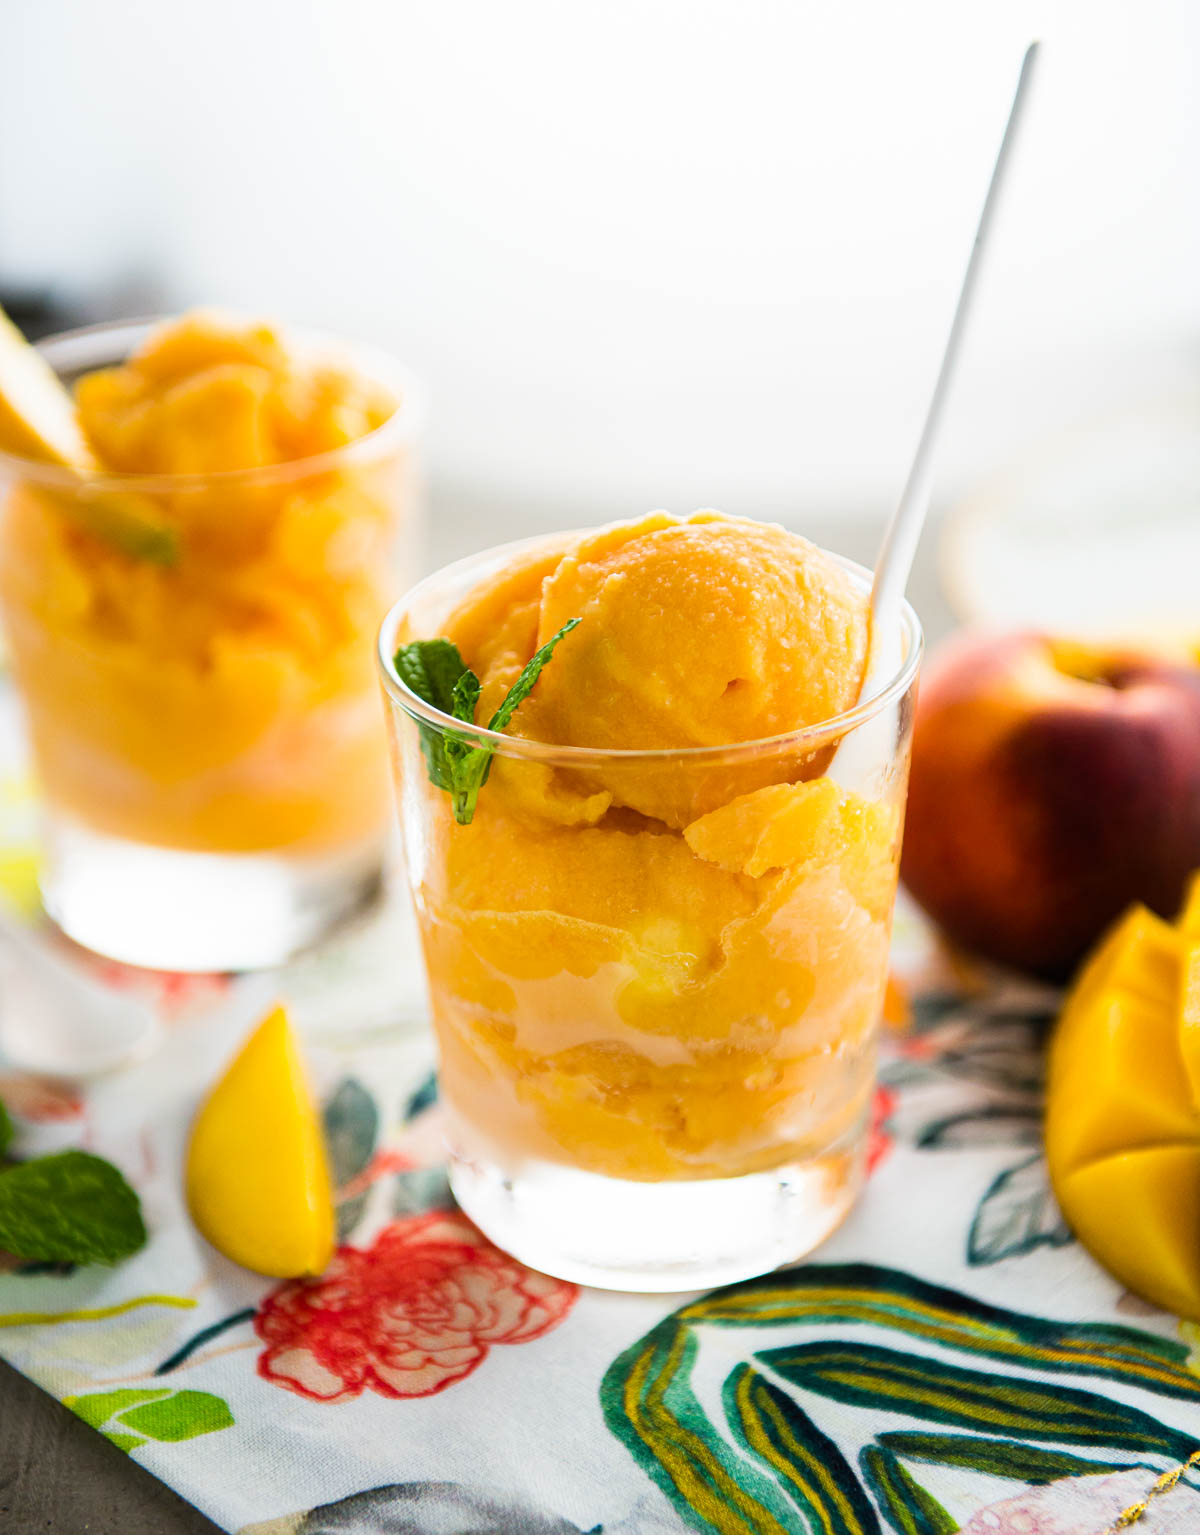 peach mango sorbet in a glass with fresh mint and a white spoon.